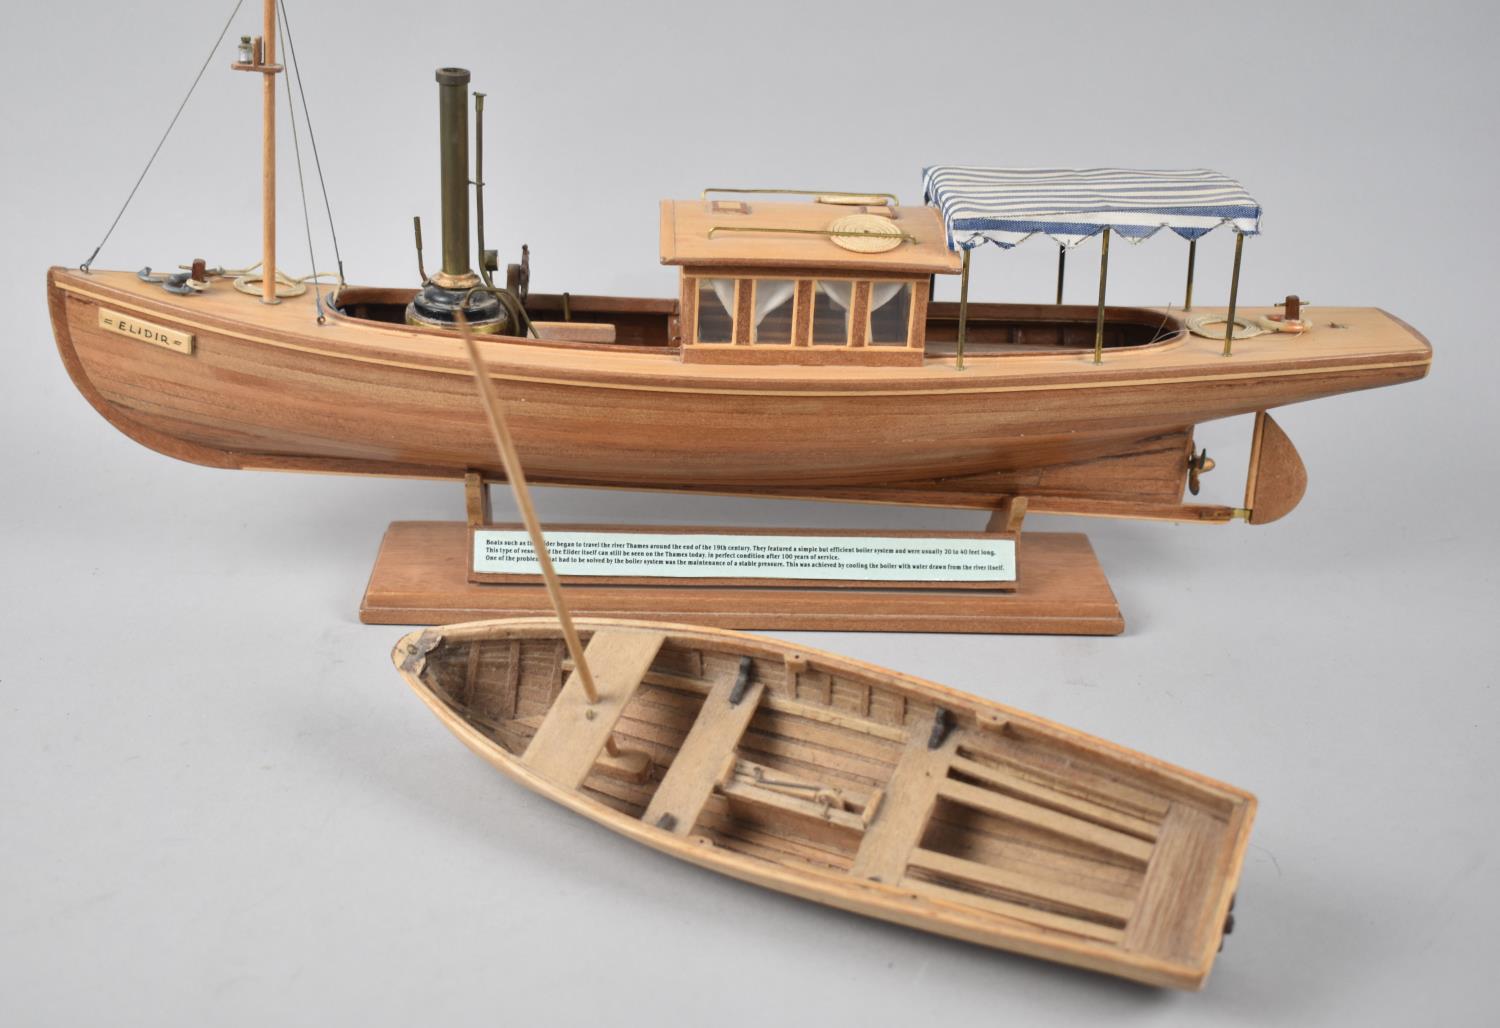 A Nicely Detailed Model of Steamed Powered Riverboat, The Elidir, 45cms Long and Also a Wooden Model